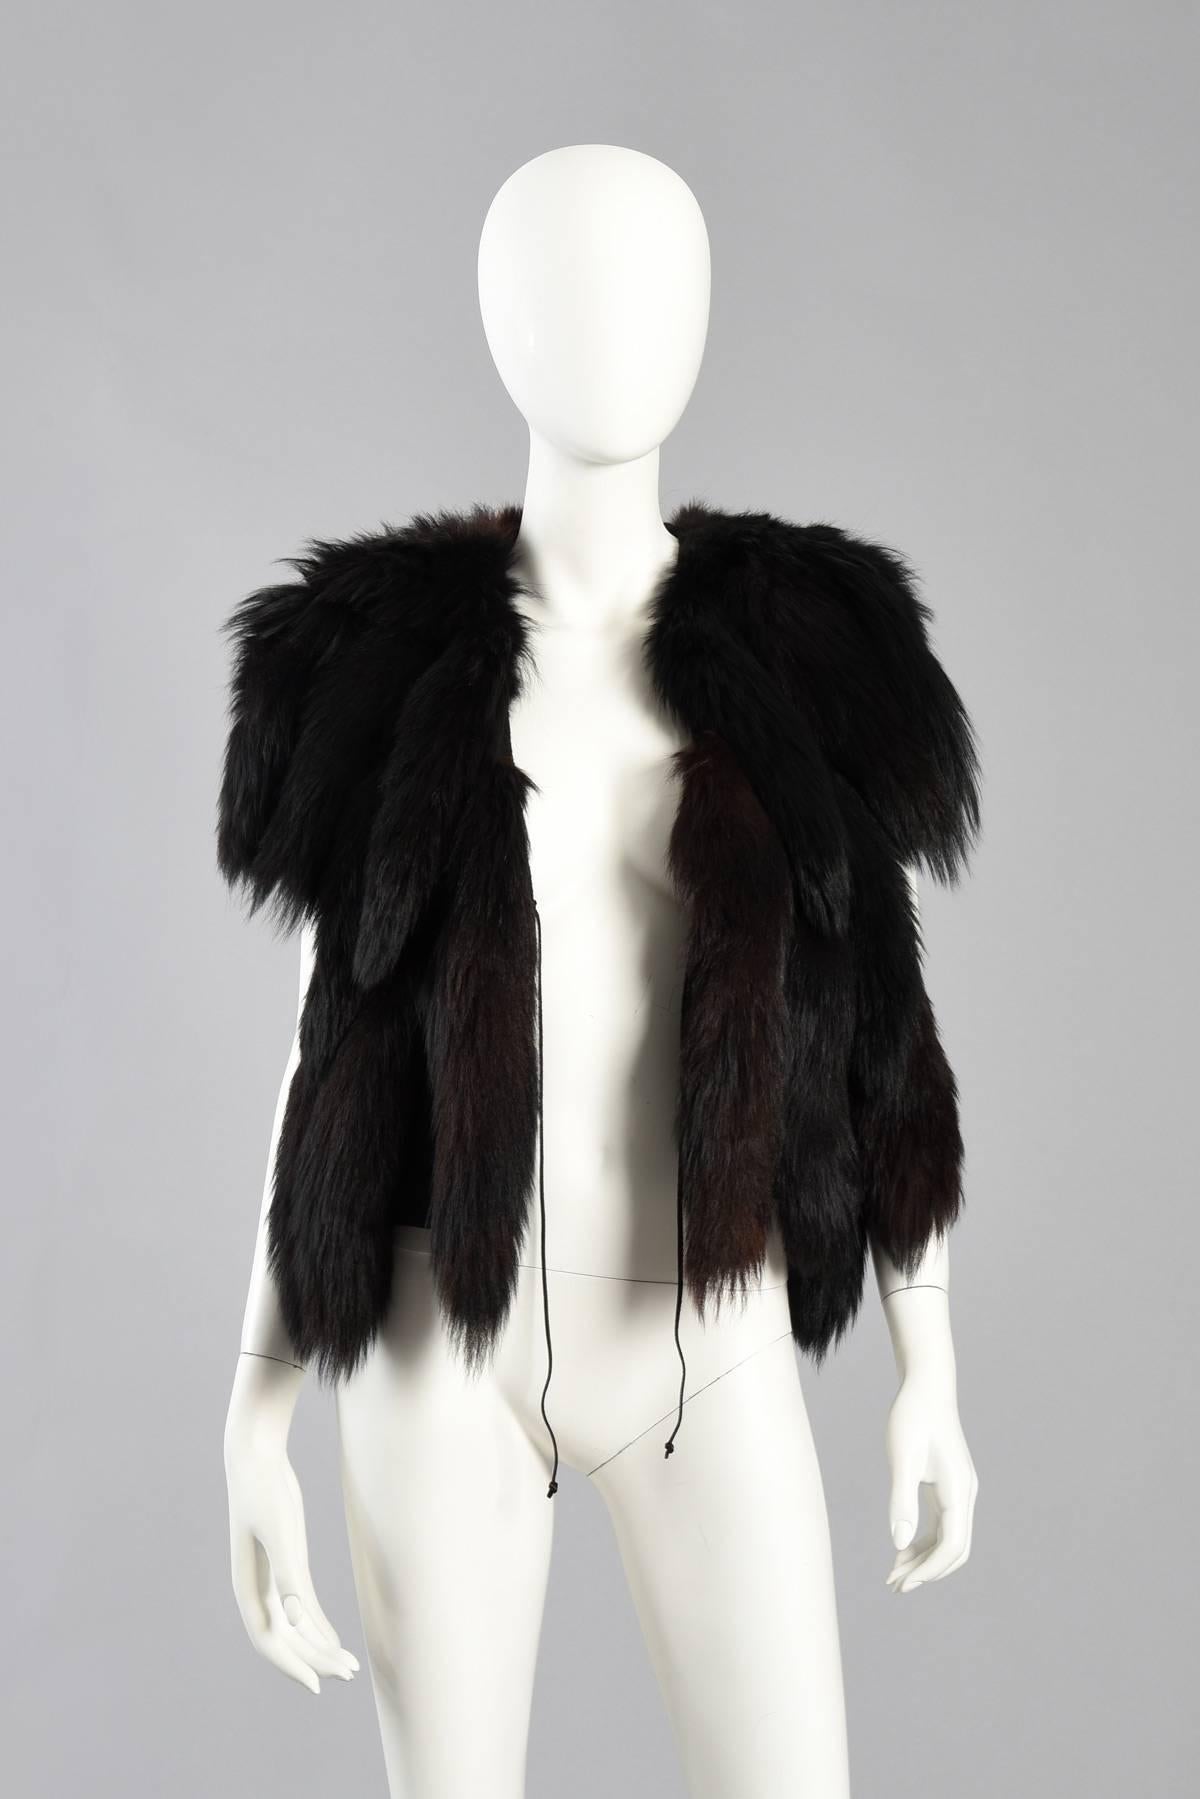 Excellent fox tail fringed gilet. We've had several similar vests in the past but have never been lucky enough to find one in all black!

Cropped length with black wool body and genuine fox tail 